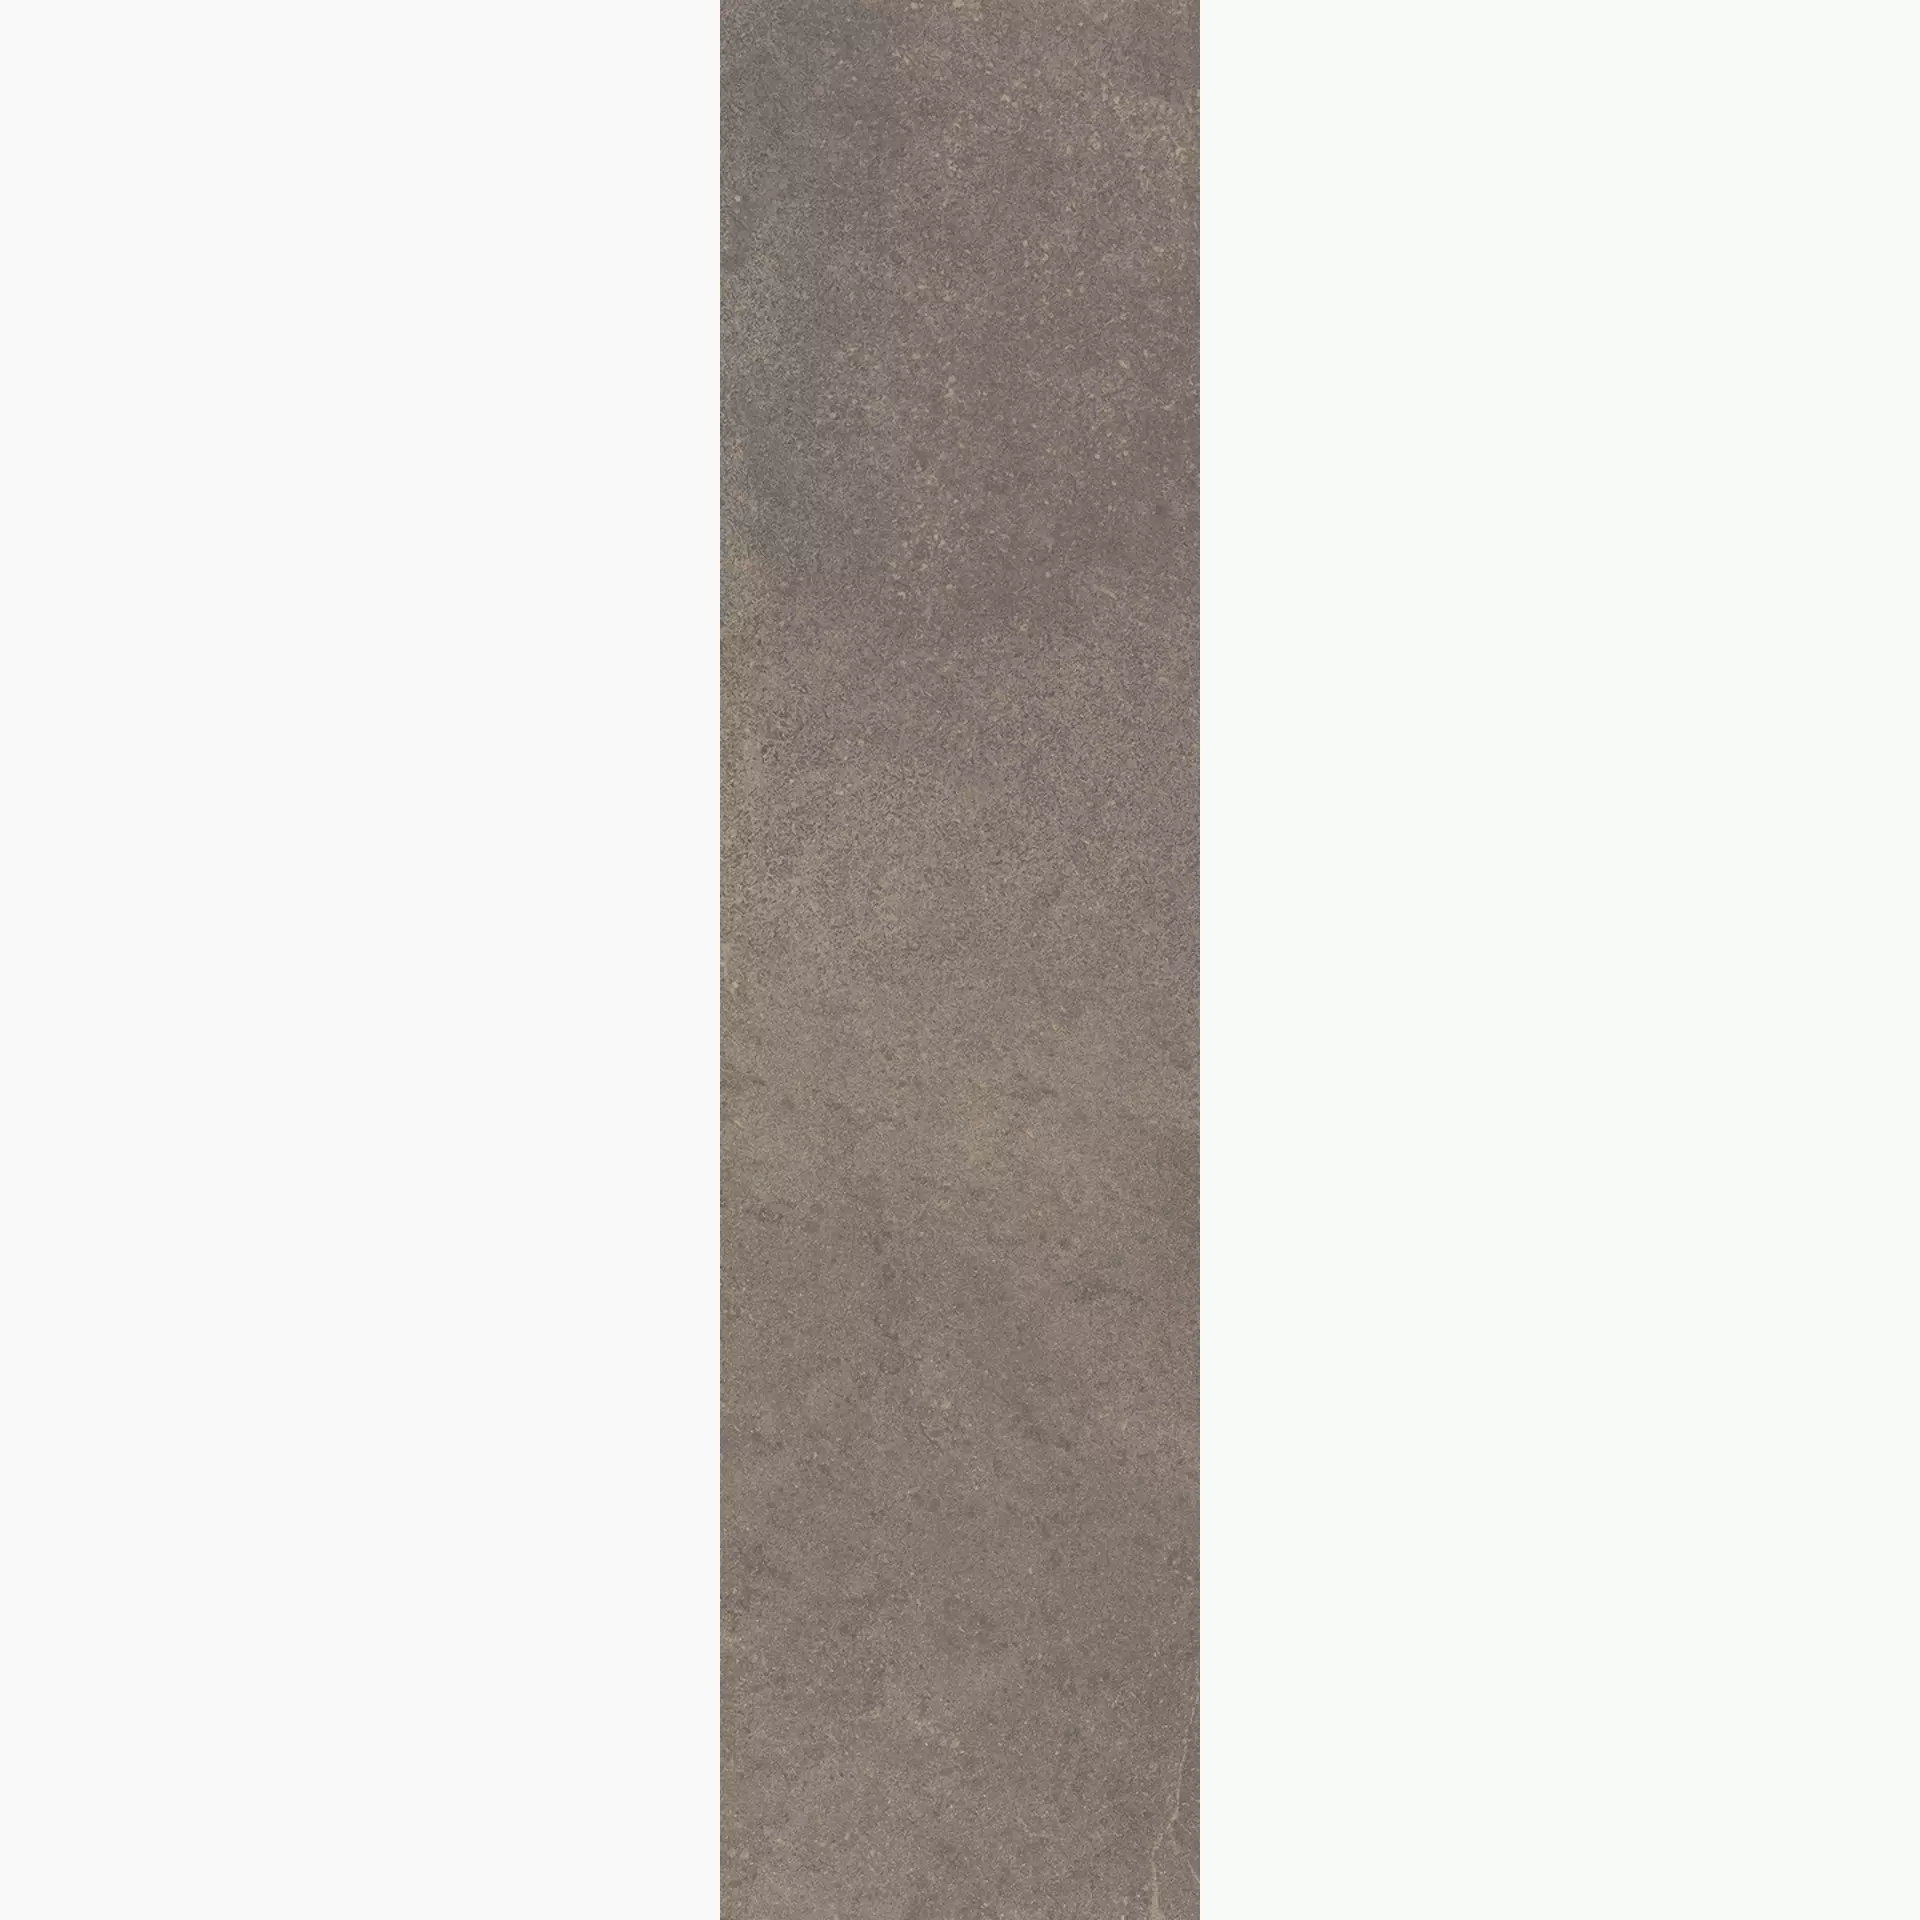 Fondovalle Planeto Mars Natural PNT274 30x120cm rectified 8,5mm